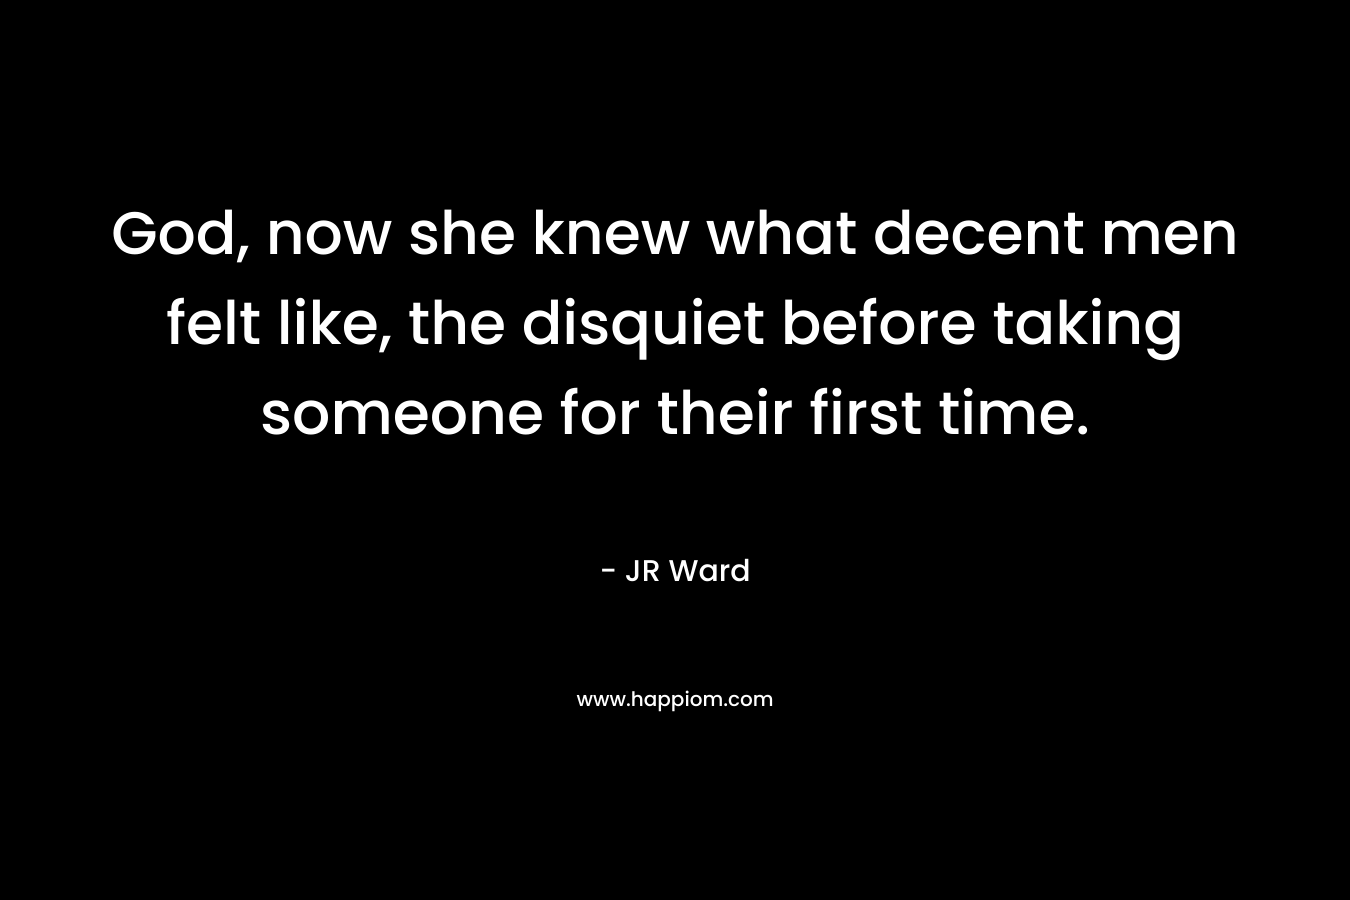 God, now she knew what decent men felt like, the disquiet before taking someone for their first time.